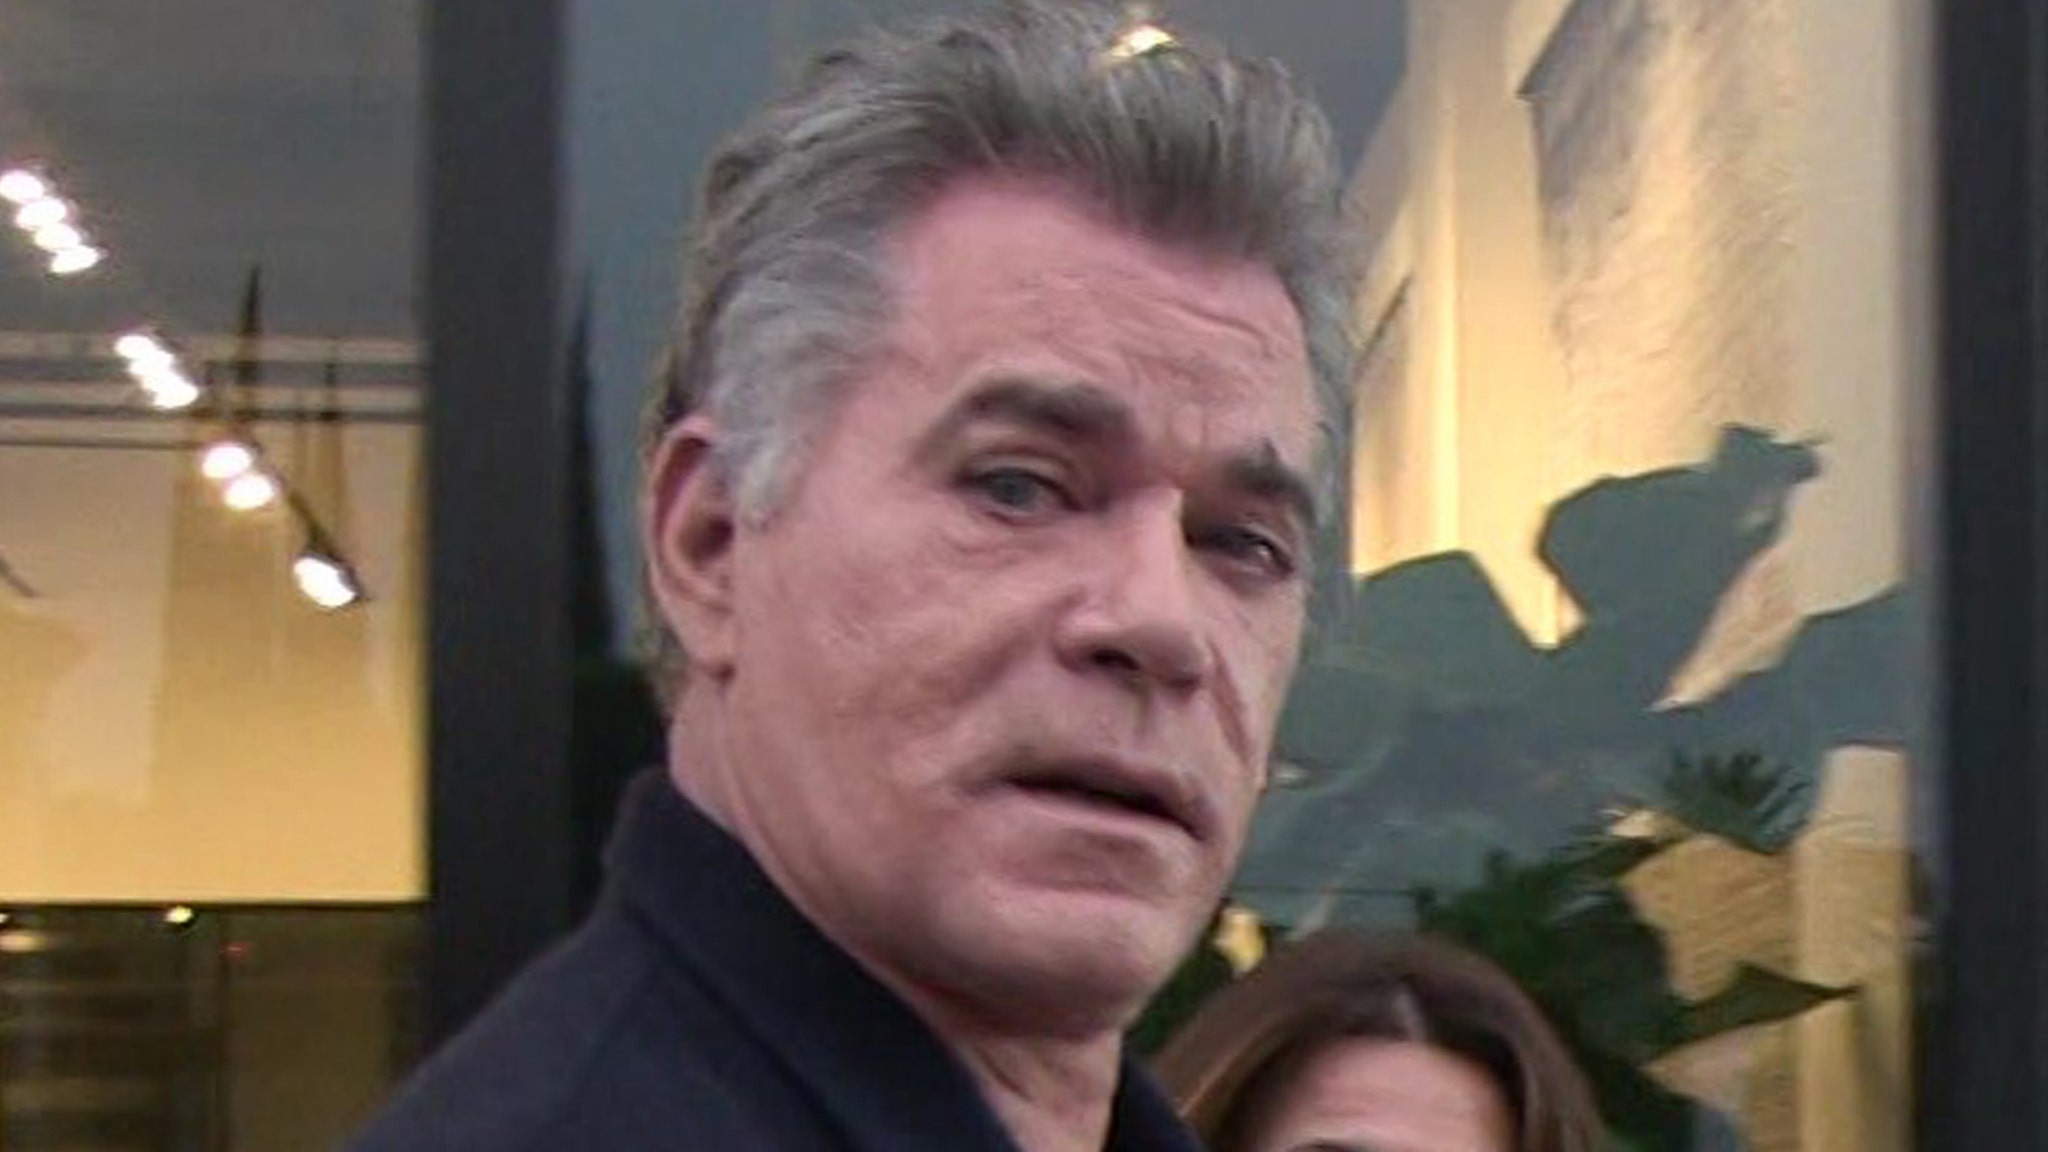 Ray Liotta's Facebook hacked, the team tries to regain control